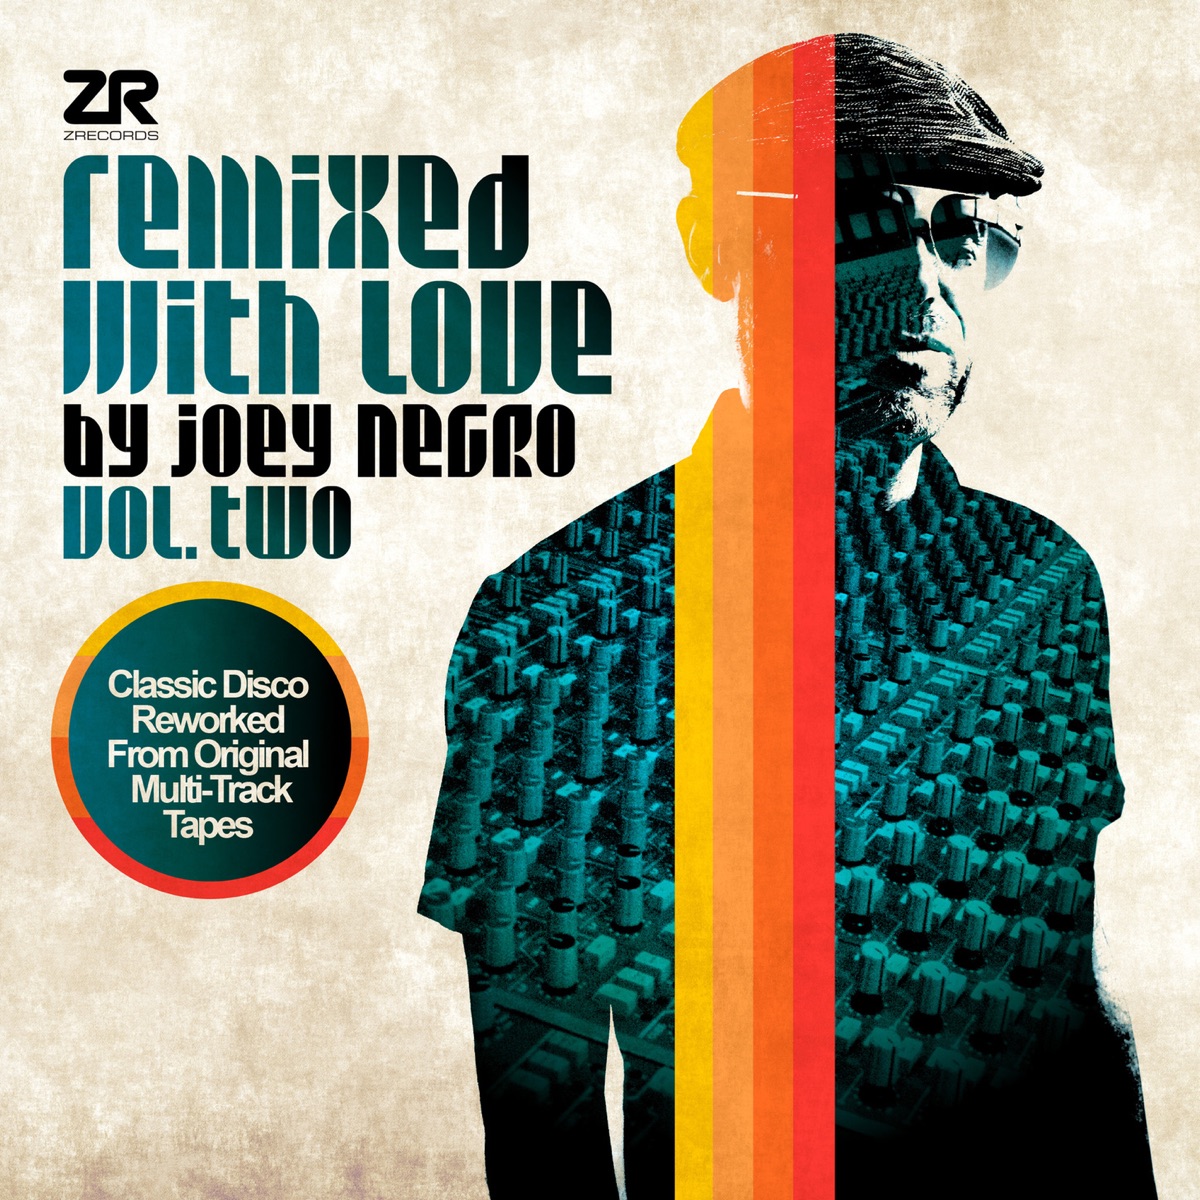 Various　Love　(Bonus　Track　Negro,　Remixed　Apple　Vol.　With　Music　Version)　by　Joey　Artistsのアルバム